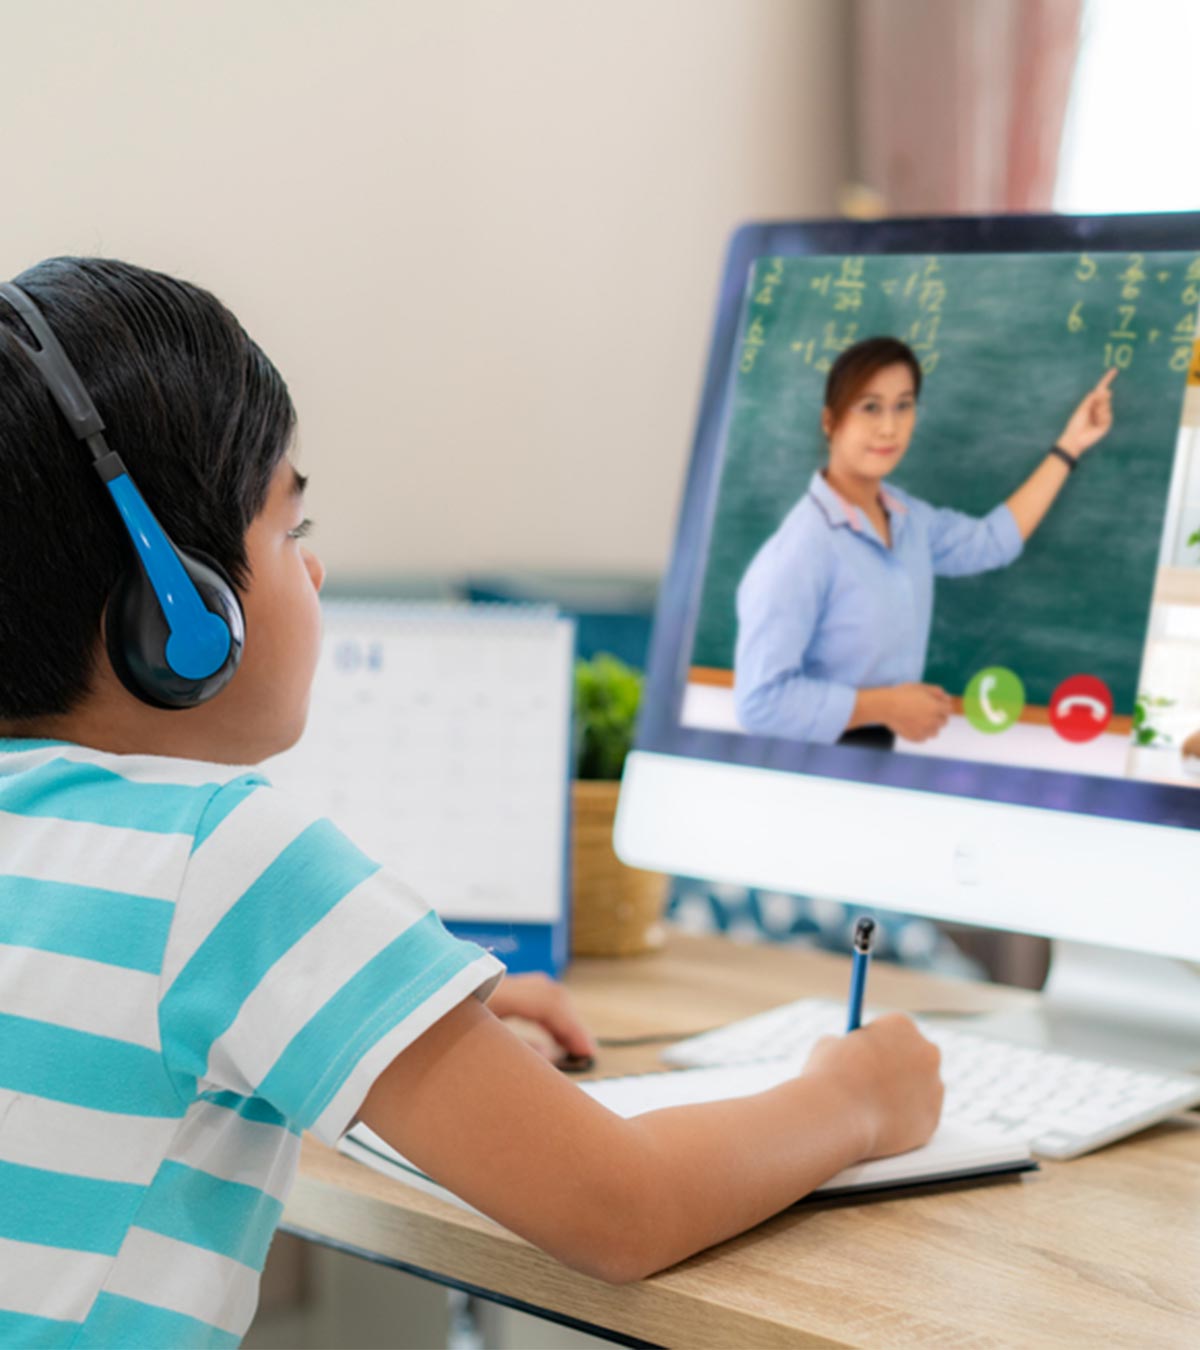 How School From Home Is Affecting Kids